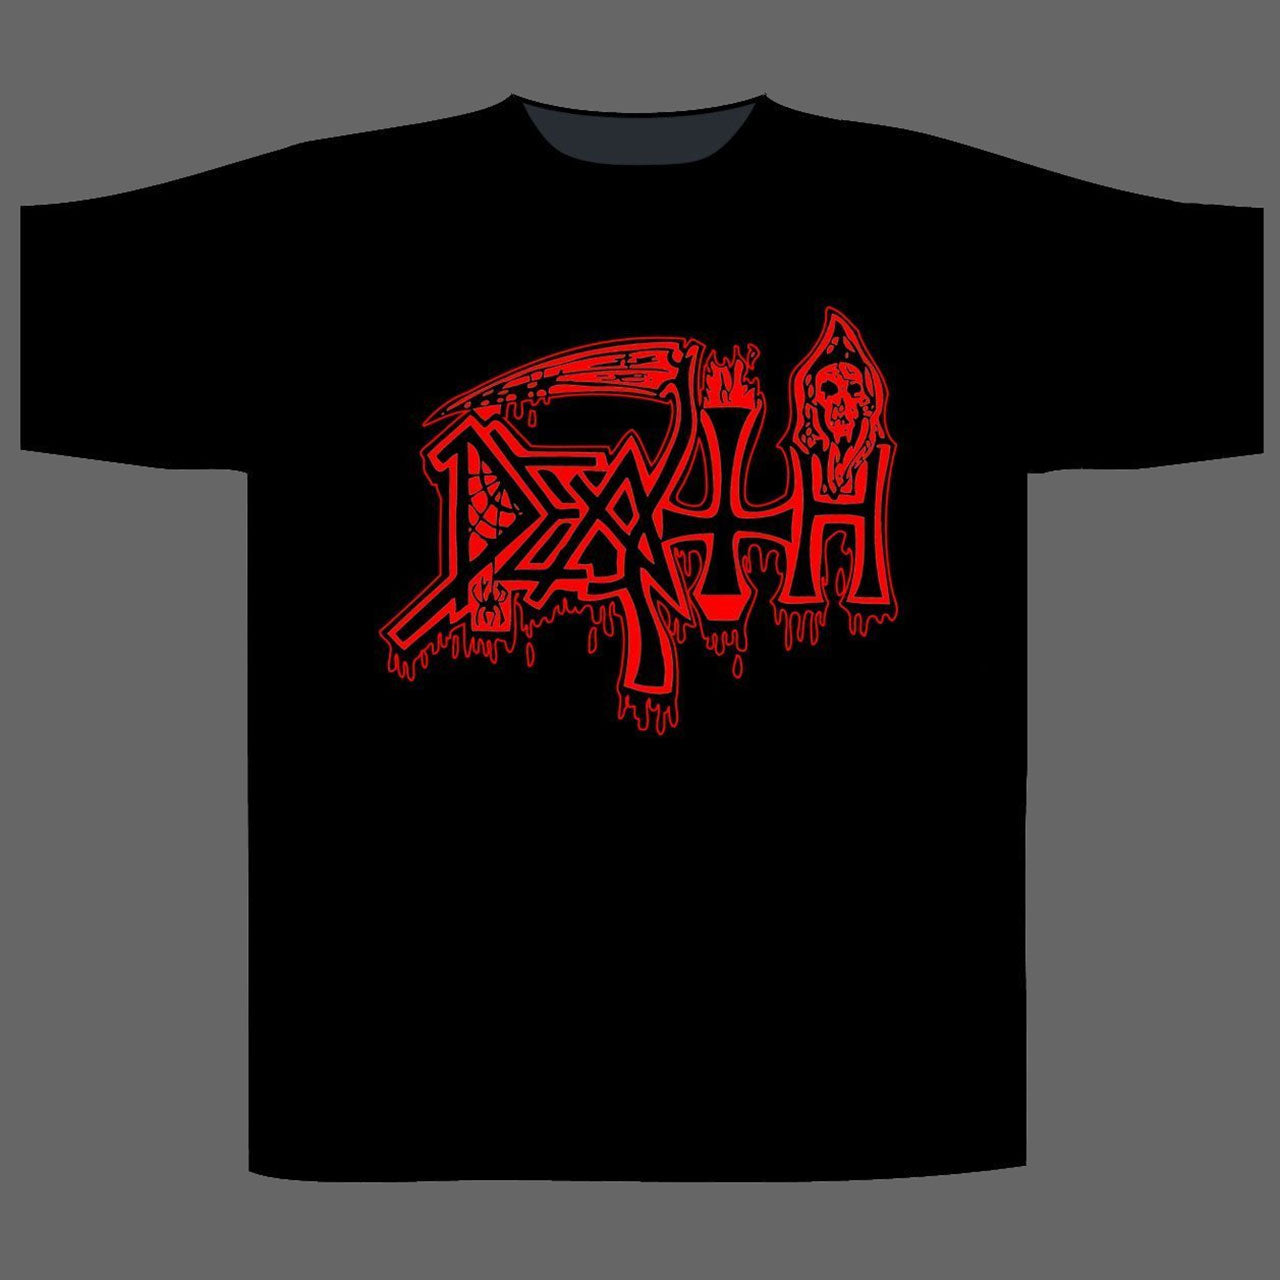 Death - Red Logo / Life Will Never Last (T-Shirt)